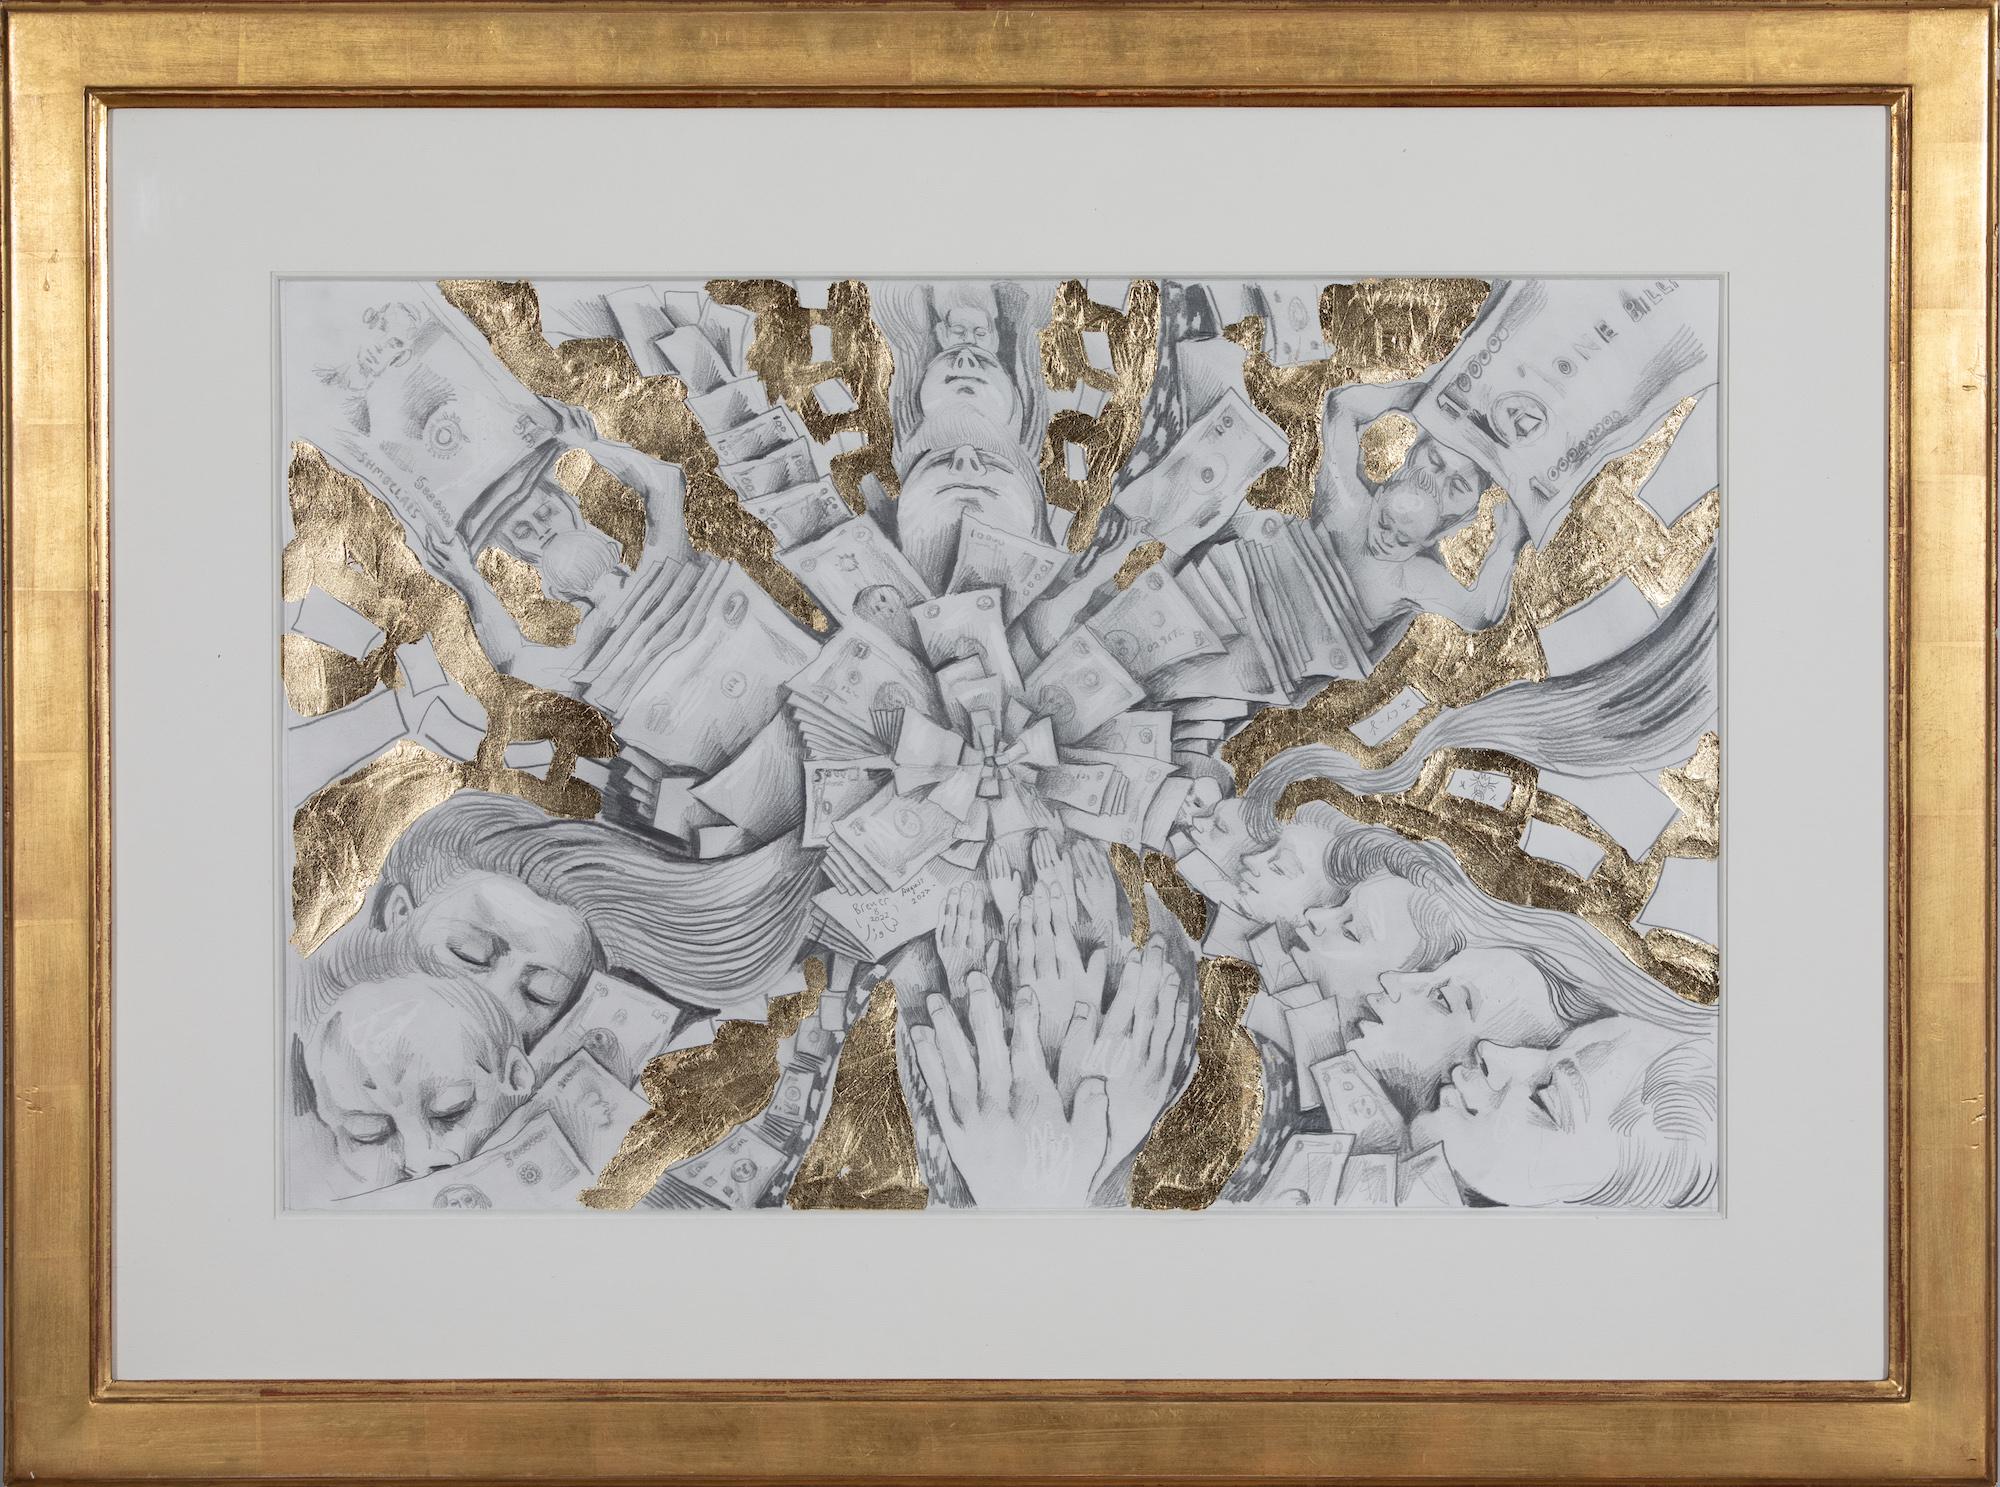 *UK BUYERS WILL PAY AN ADDITIONAL 20% VAT ON TOP OF THE ABOVE PRICE

Inflation by David Breuer-Weil (b. 1965)
Pencil and gold leaf on paper
43 x 66 cm (16 ⁷/₈ x 26 inches)
Signed and dated twice in the centre
Executed in 2022
